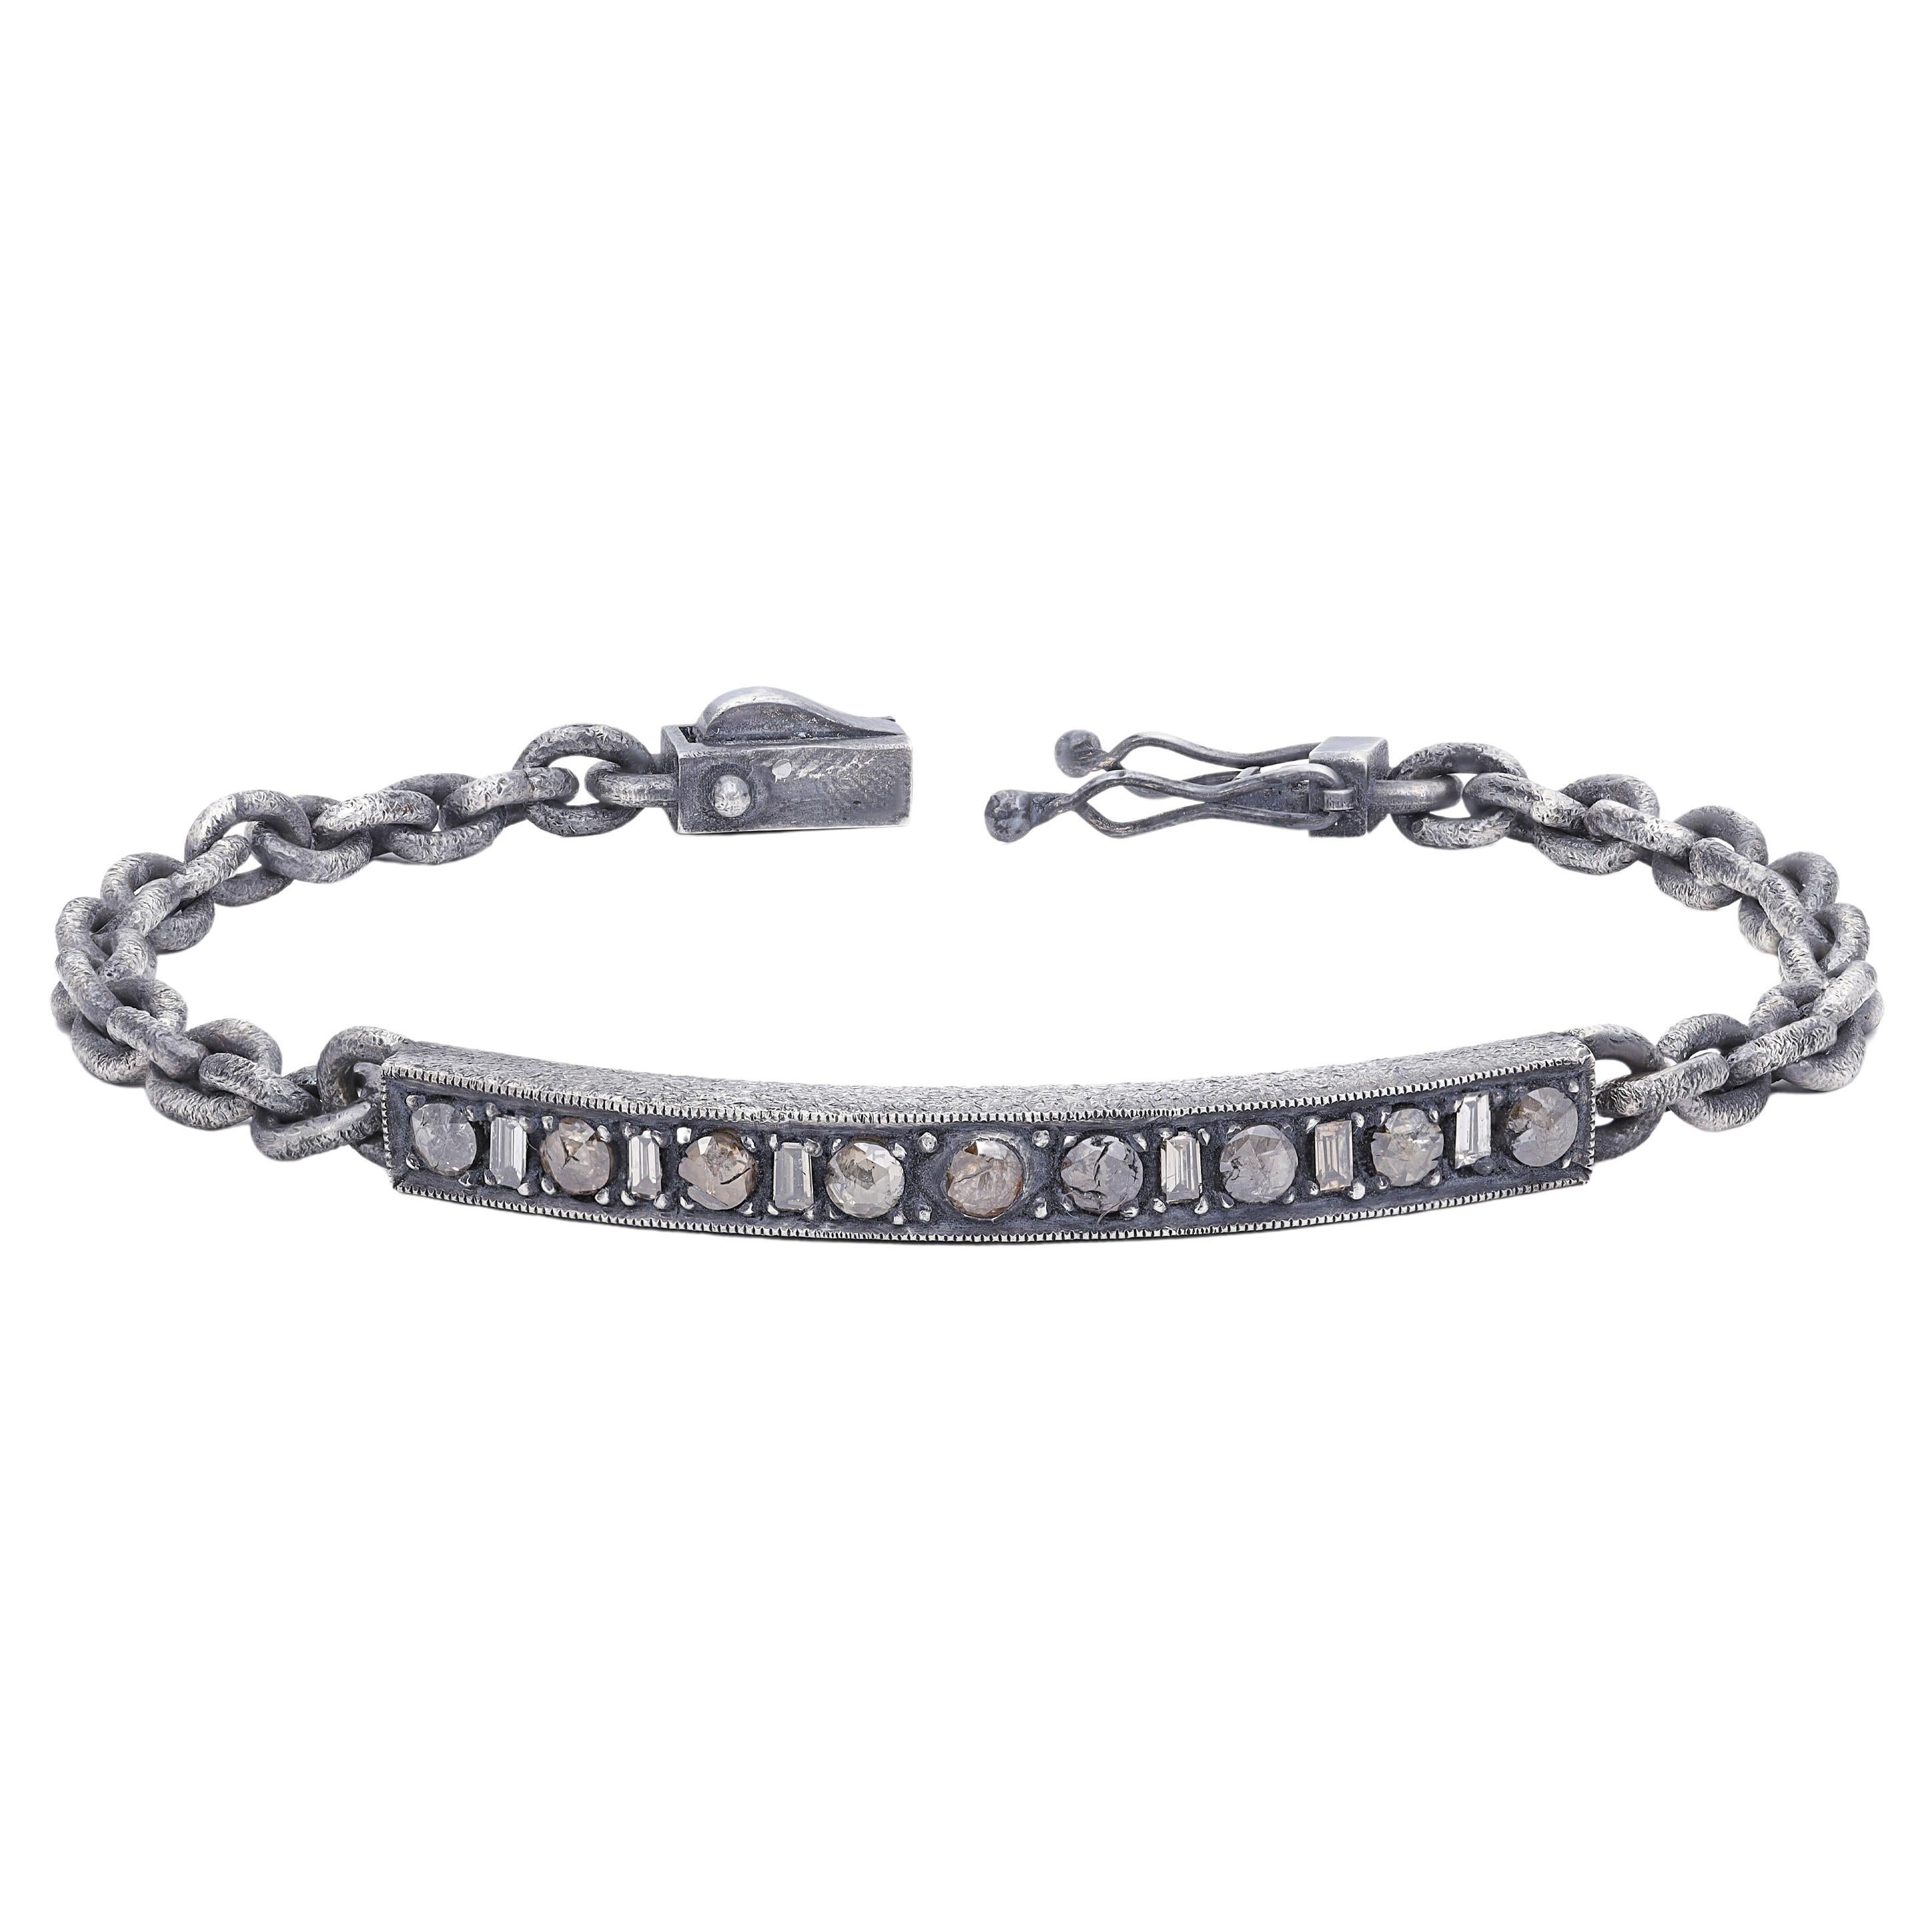 Oxidised Silver Tag Chain Bracelet with Rose Cut Diamonds and Baguette Diamonds